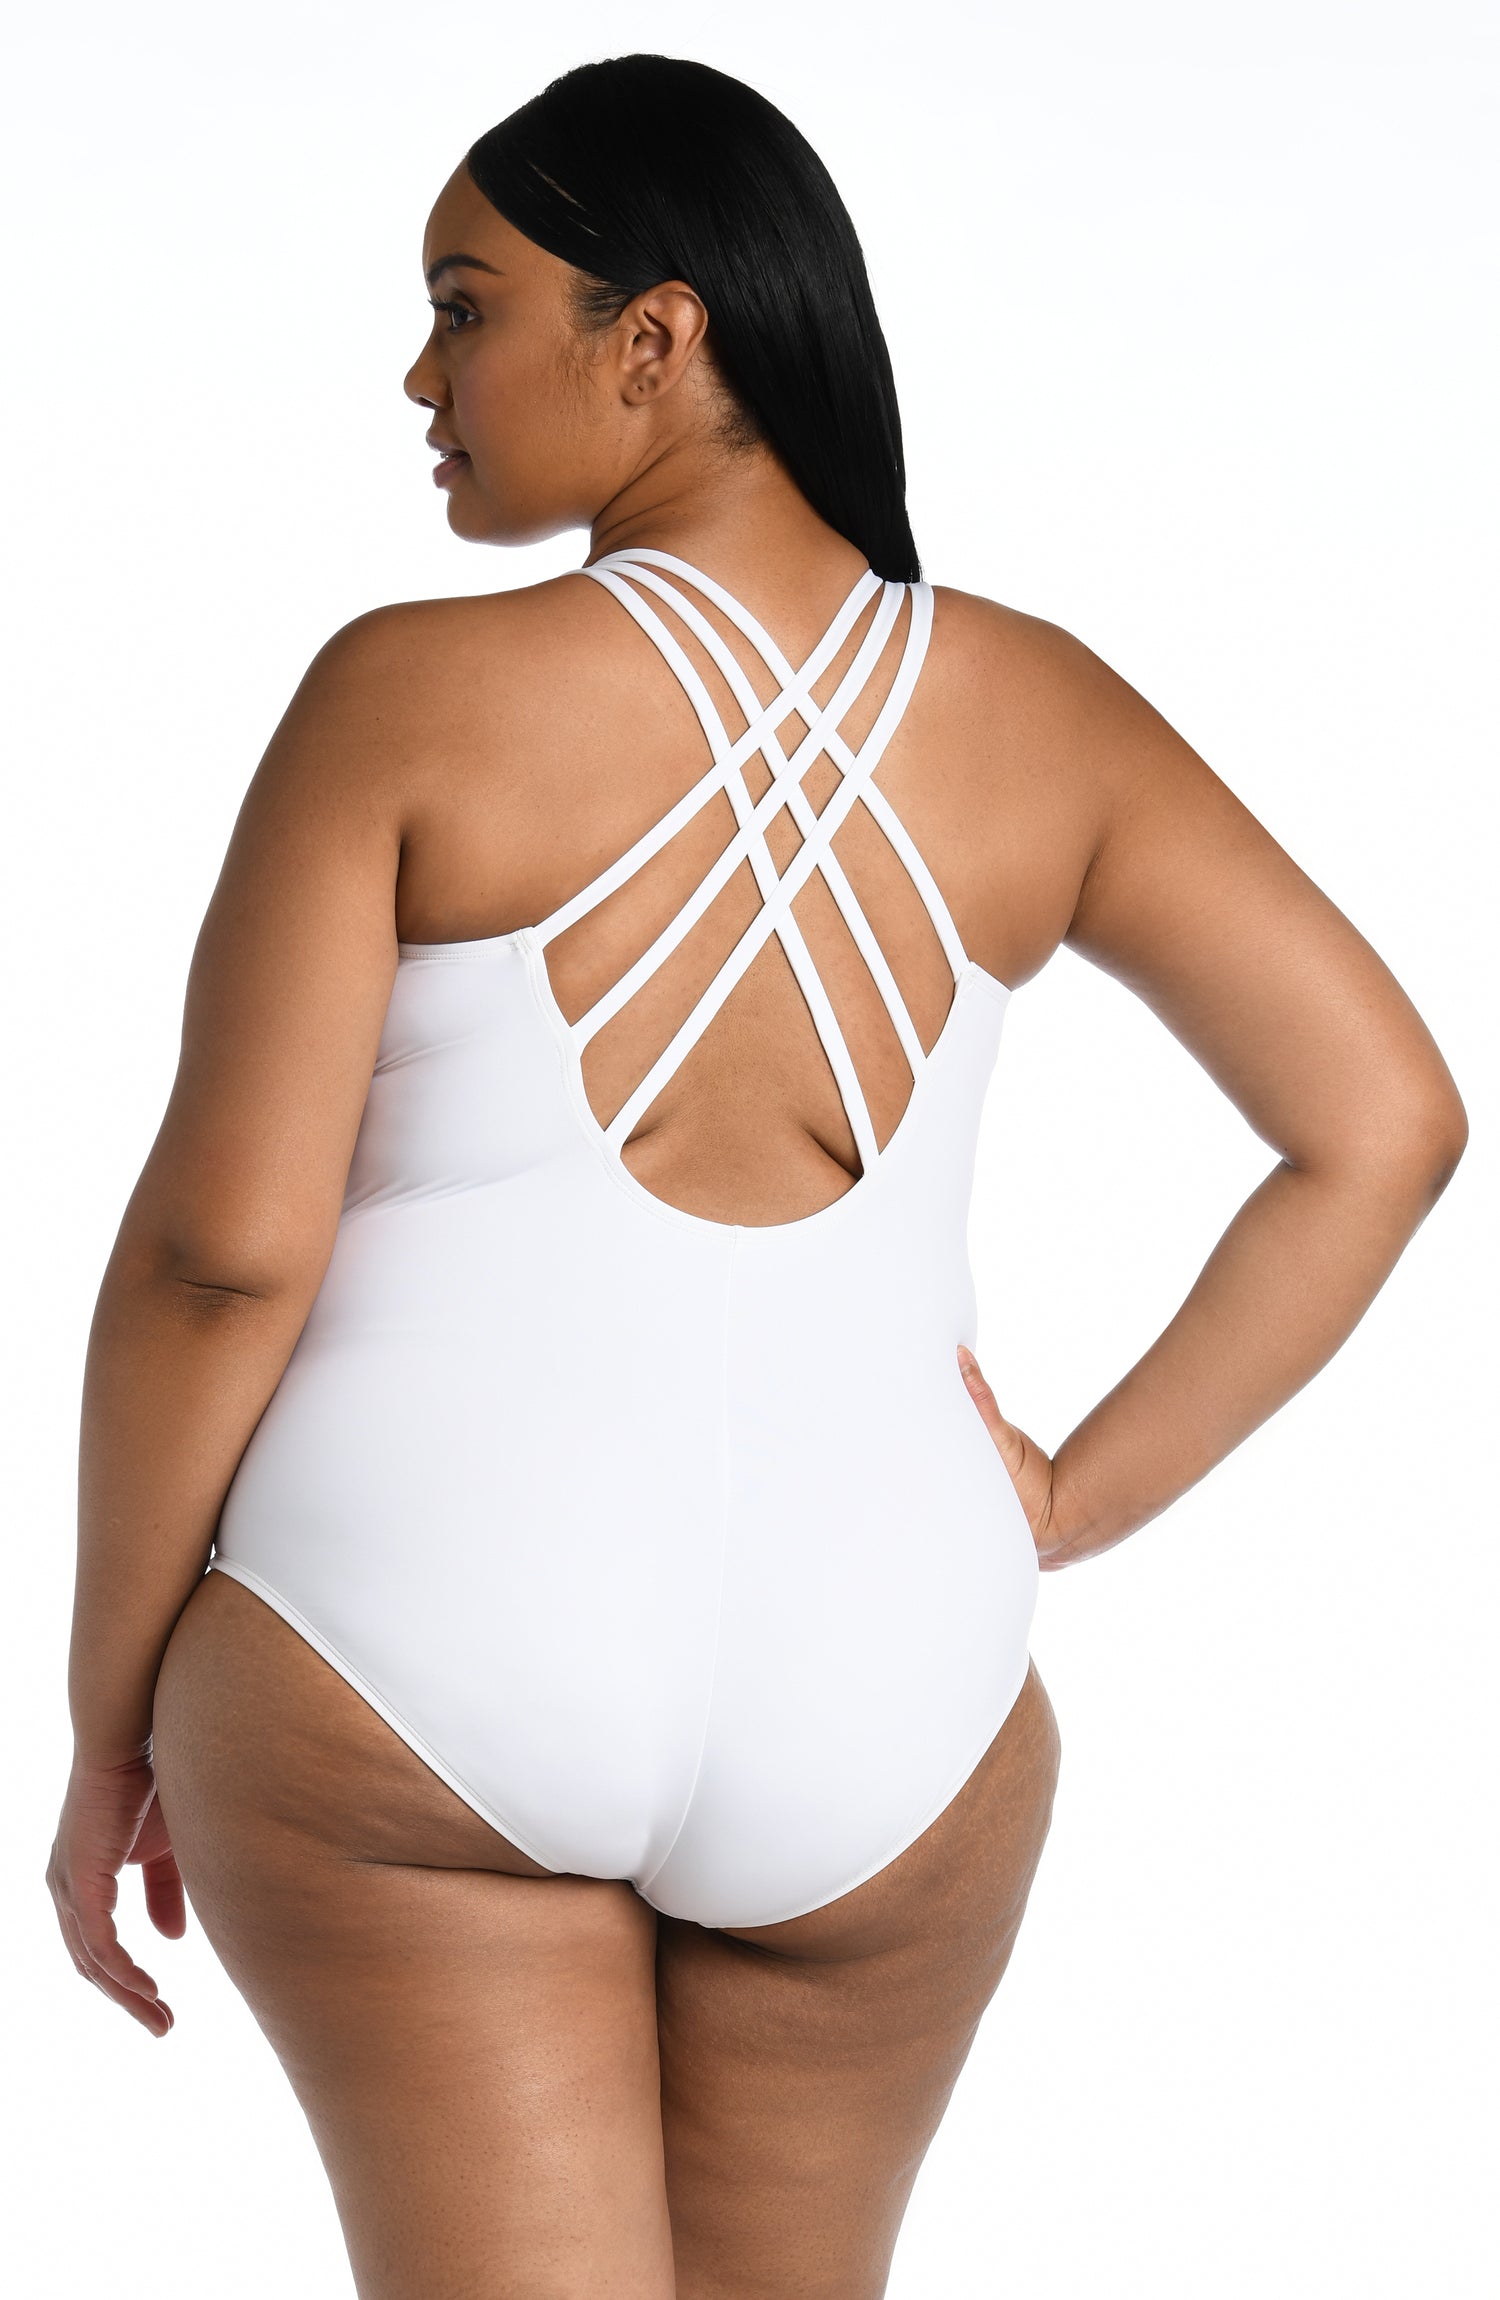 Model is wearing a white one piece swimsuit from our Best-Selling Island Goddess collection.